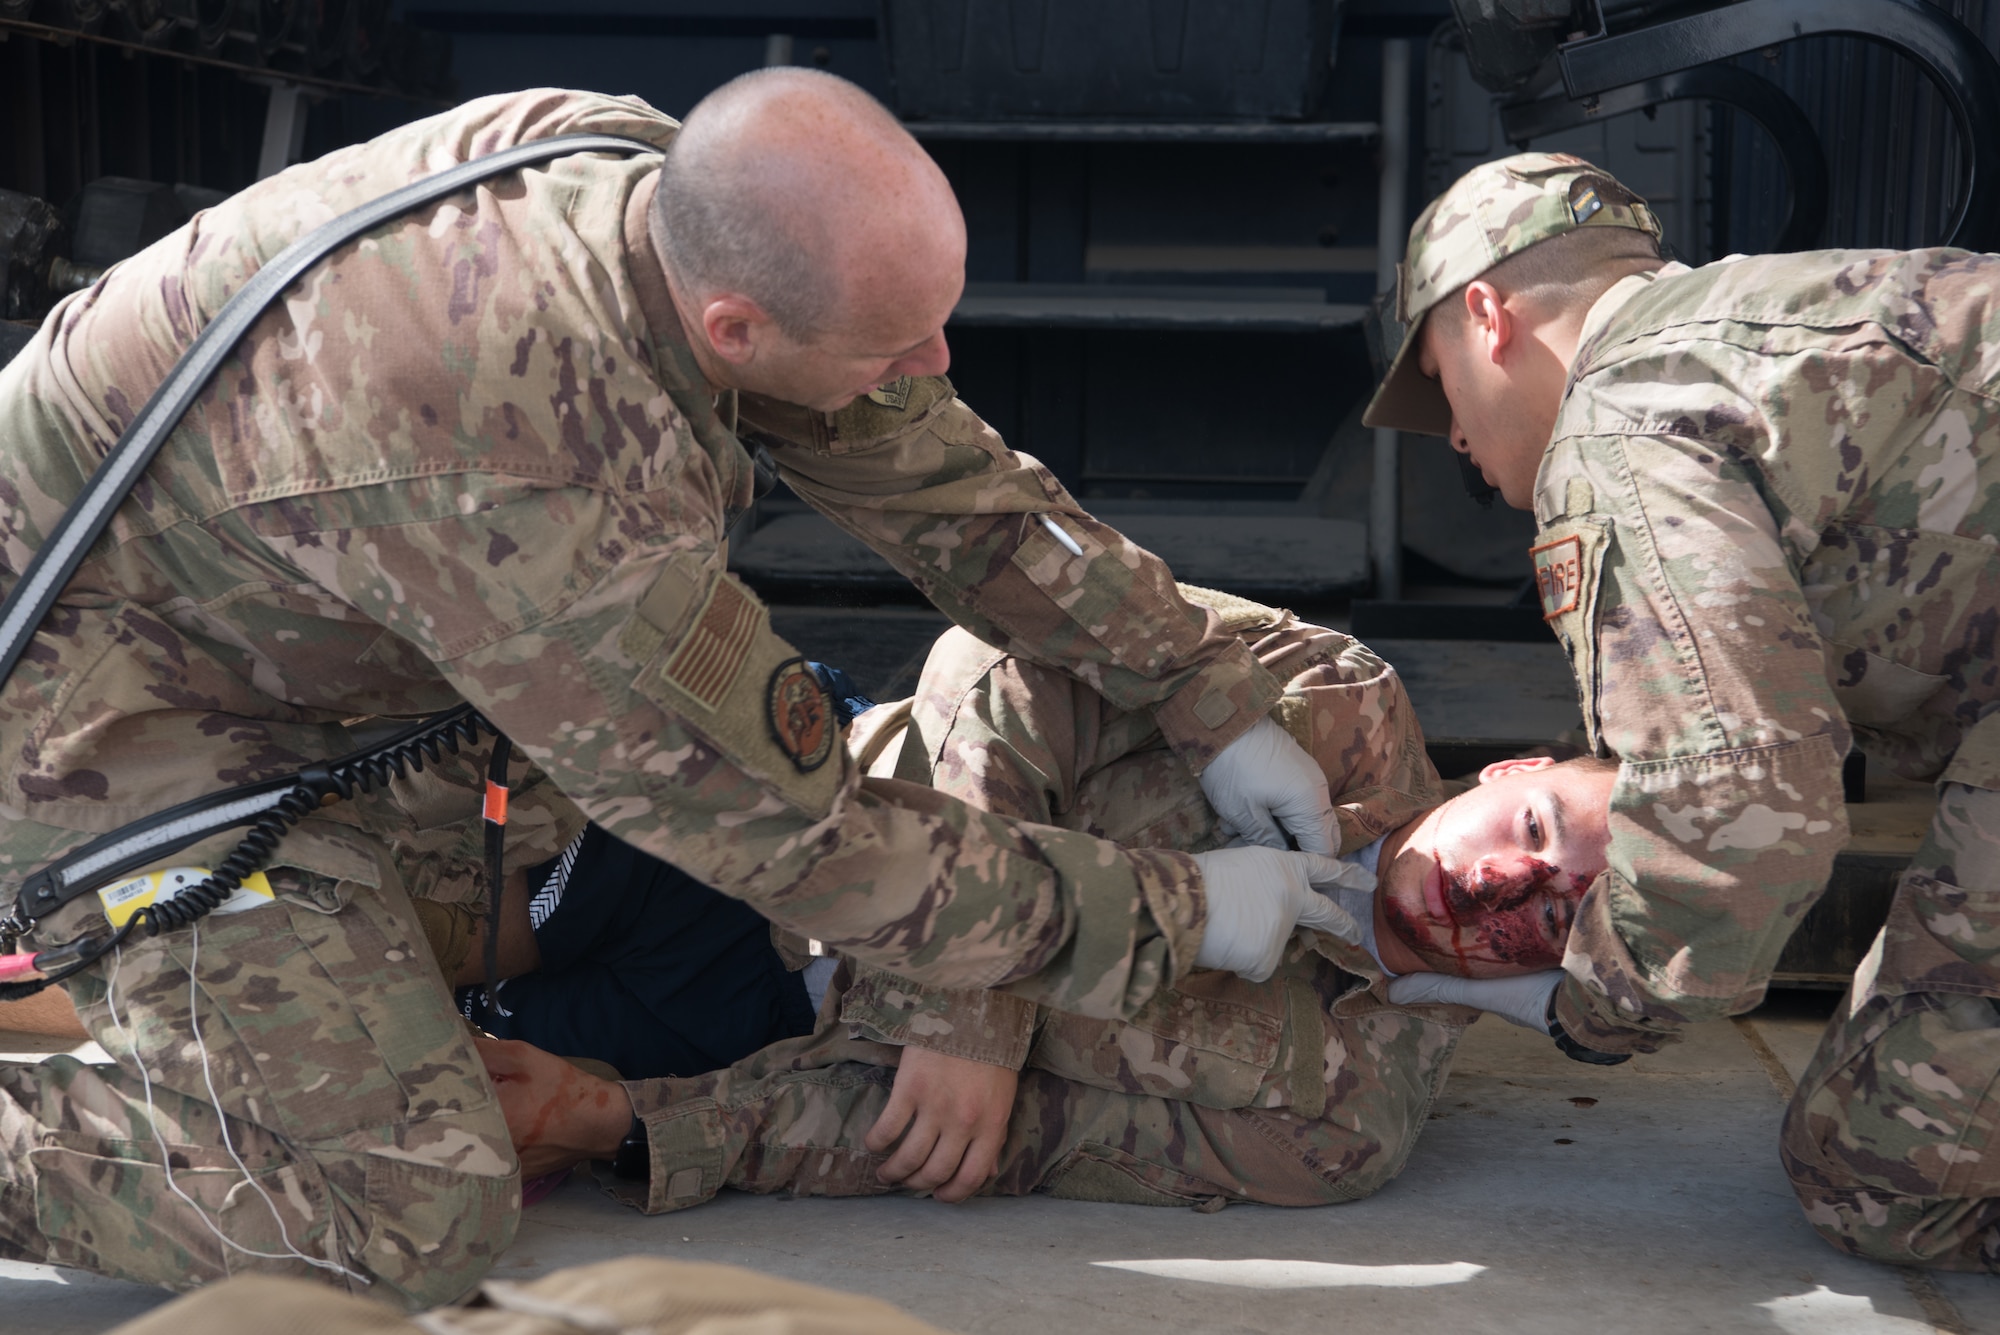 Firefighters assigned to the 380th Expeditionary Civil Engineer Squadron medically evaluate Senior Airman Naseem Eissa, 380th Expeditionary Logistics Readiness Squadron ground transportation operator, a moulage victim, during an exercise on Al Dhafra Air Base, United Arab Emirates, Sept. 24, 2019. A variety of agencies including medics, firefighters and security forces defenders participated in the exercise to test their readiness, knowledge of emergency procedures and interagency cooperation amongst the wing’s first responders. (U.S. Air Force photo by Tech. Sgt. Jocelyn A. Ford)